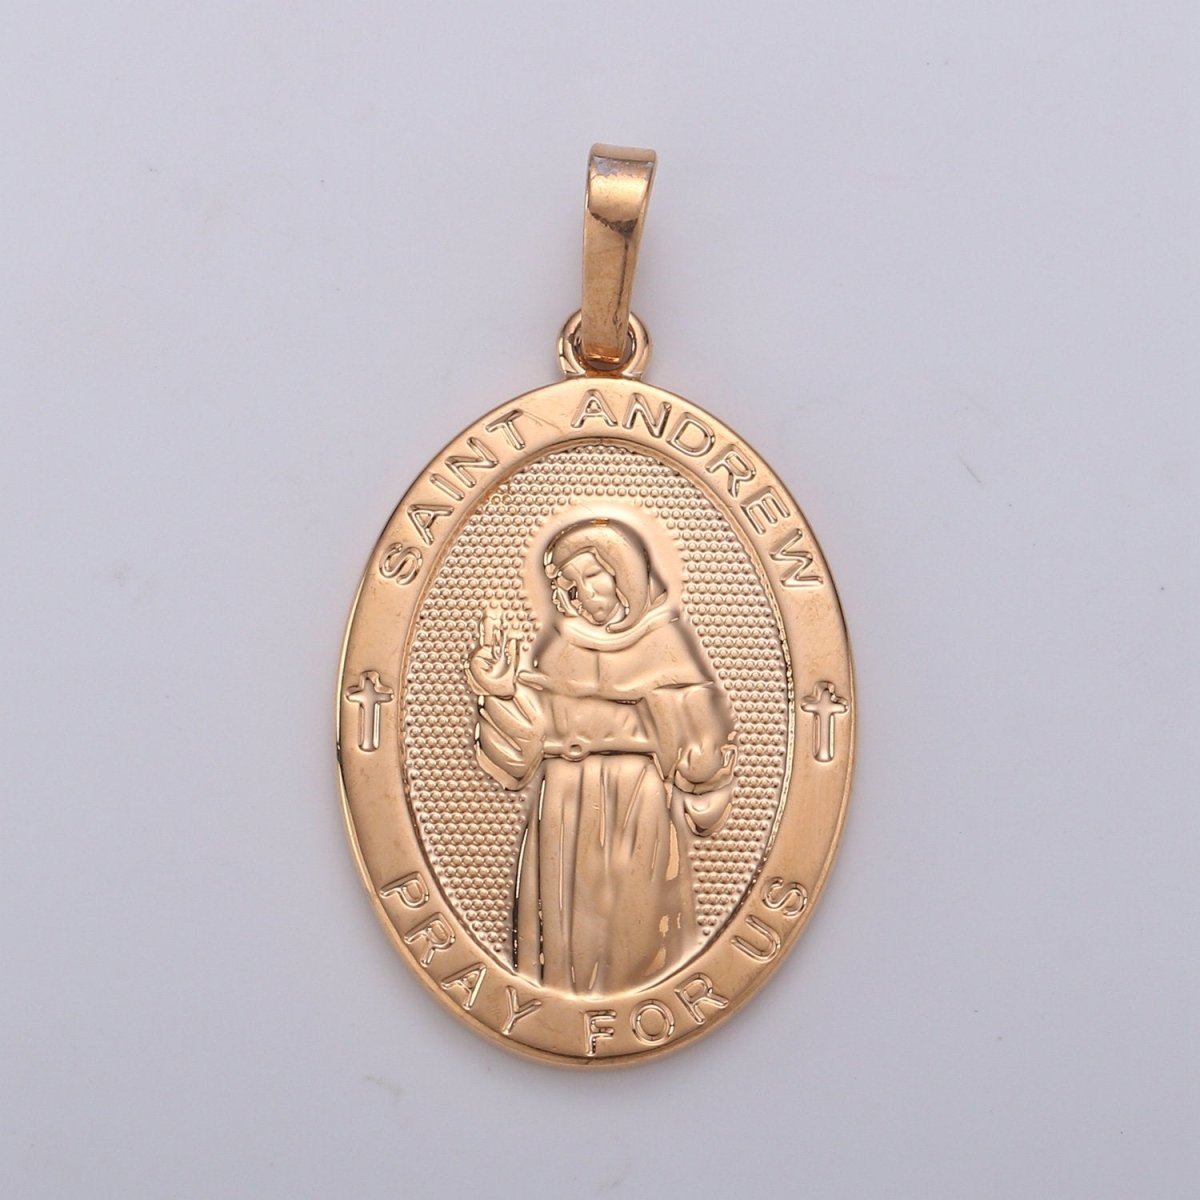 18k Rose Gold Filled St Andrew Cross Medal - Patron of Fishermen and Unmarried Women - Religious Jewelry Novena Prayer Rosary Supply J-116 - DLUXCA